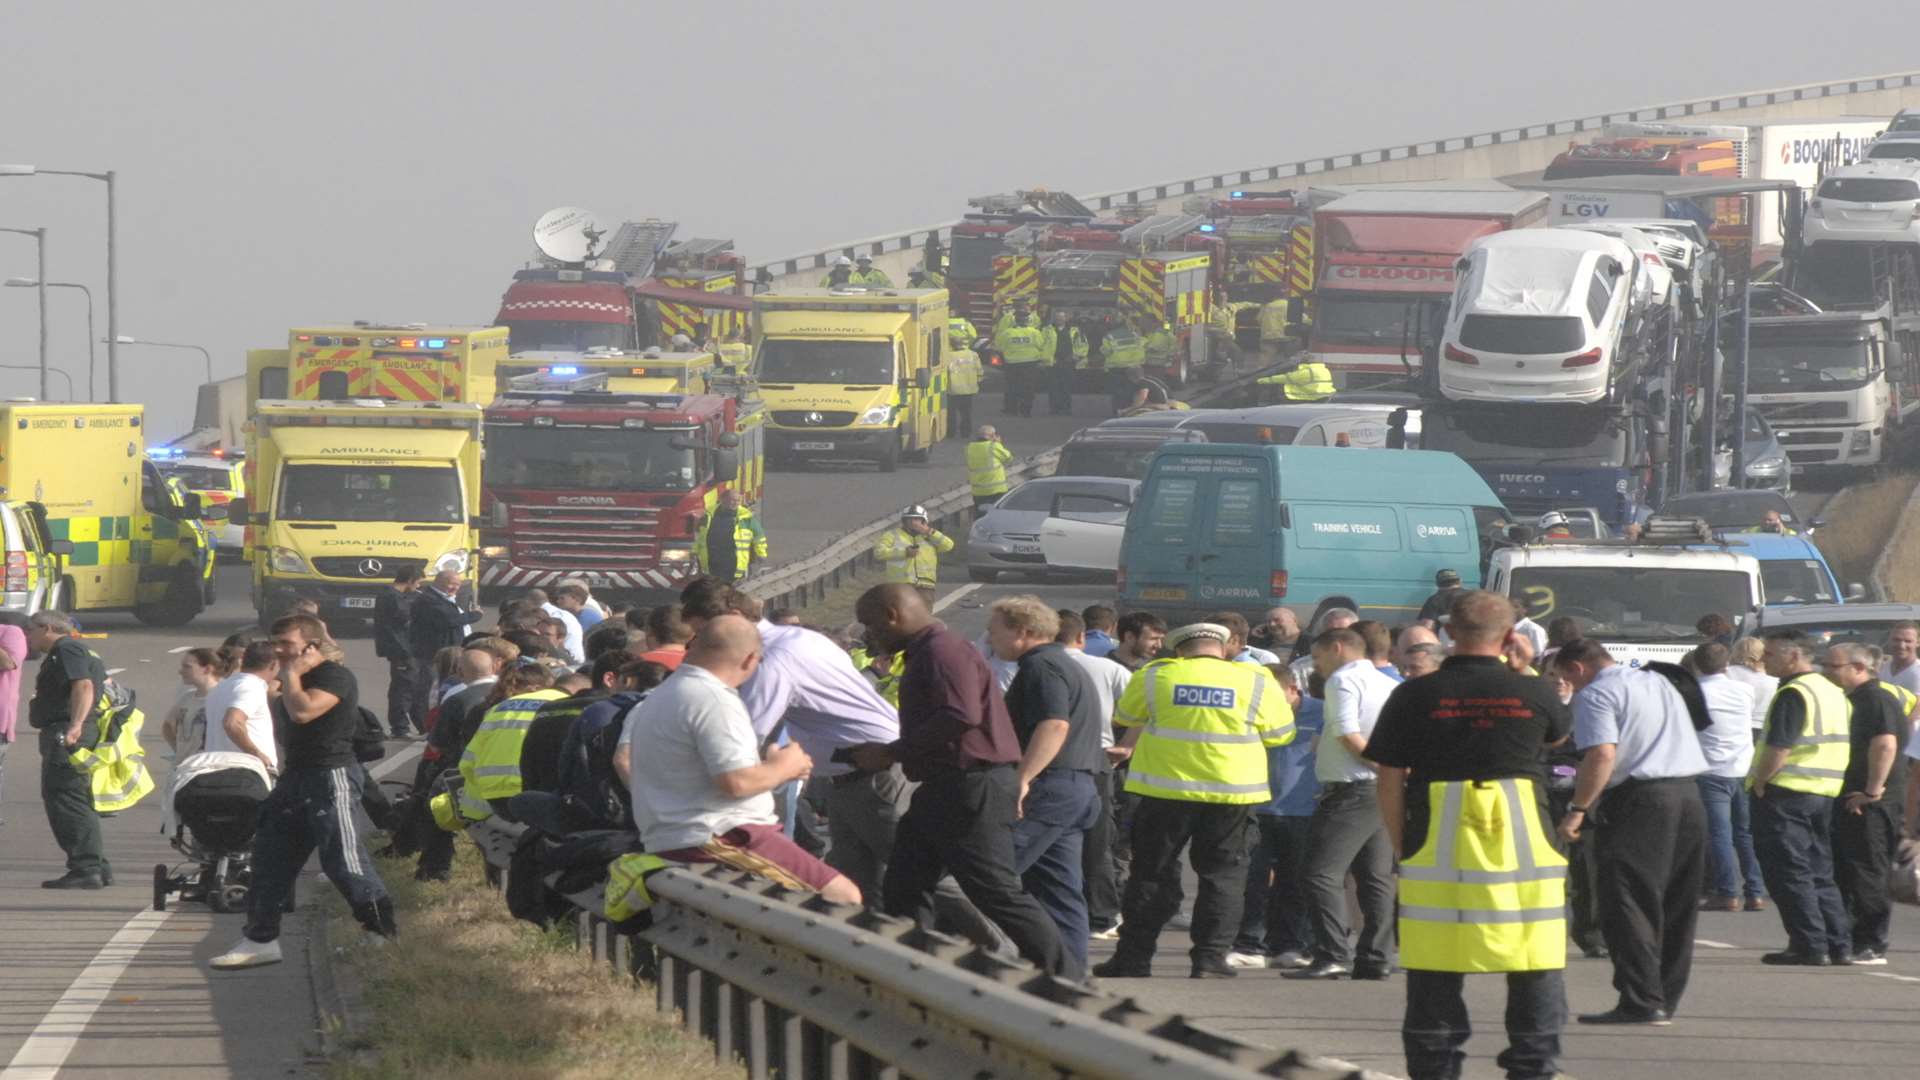 The scene at the crossing following the accident. Picture: Chris Davey